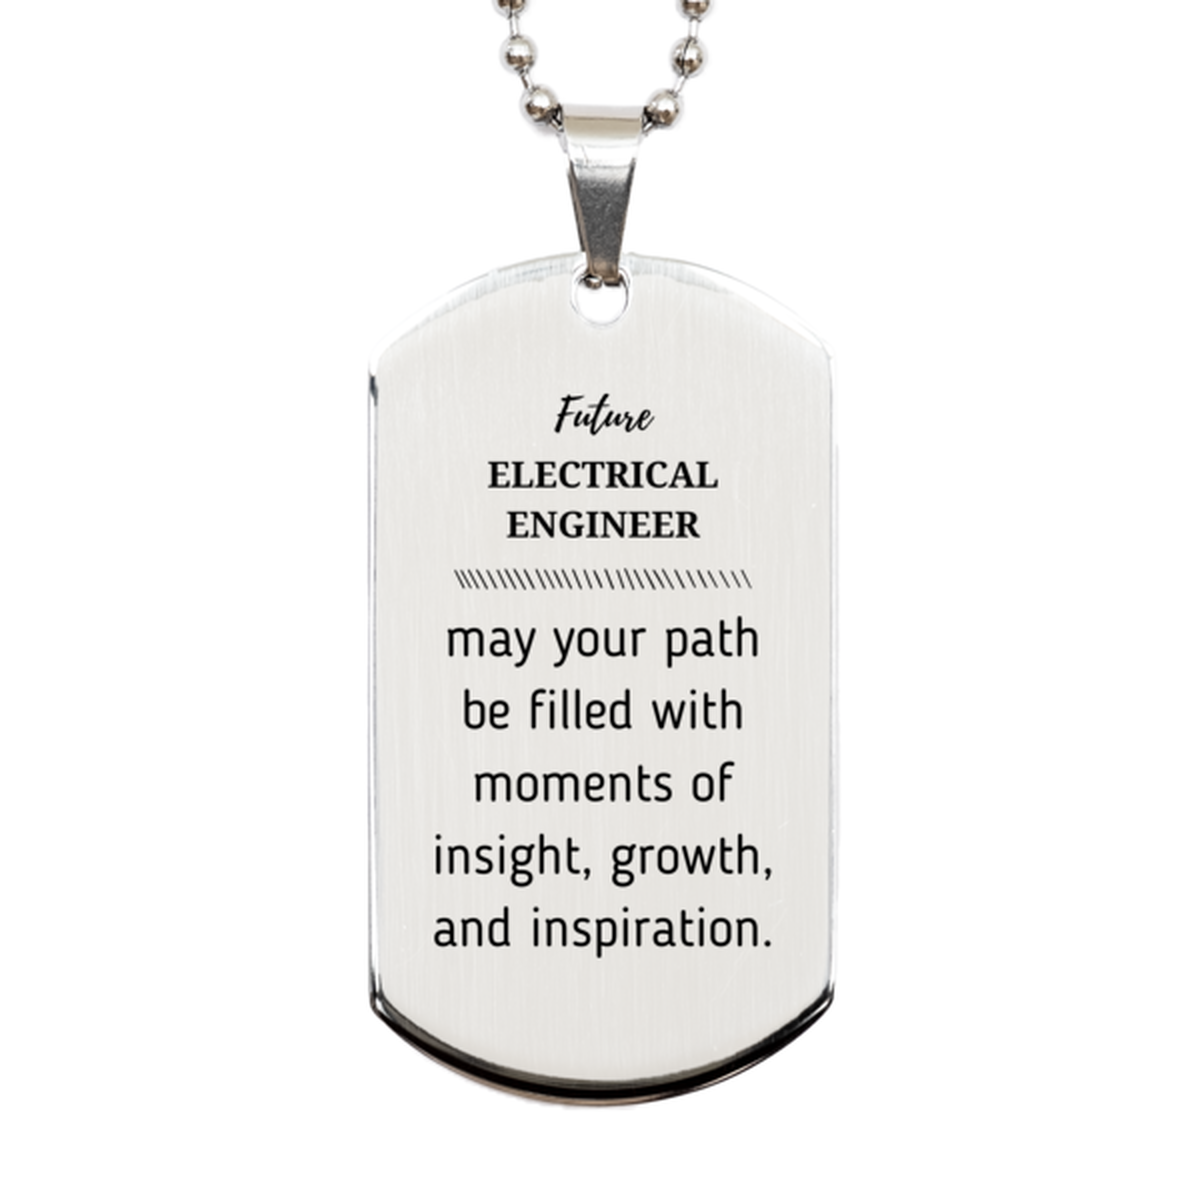 Future Electrical Engineer Gifts, May your path be filled with moments of insight, Graduation Gifts for New Electrical Engineer, Christmas Unique Silver Dog Tag For Men, Women, Friends